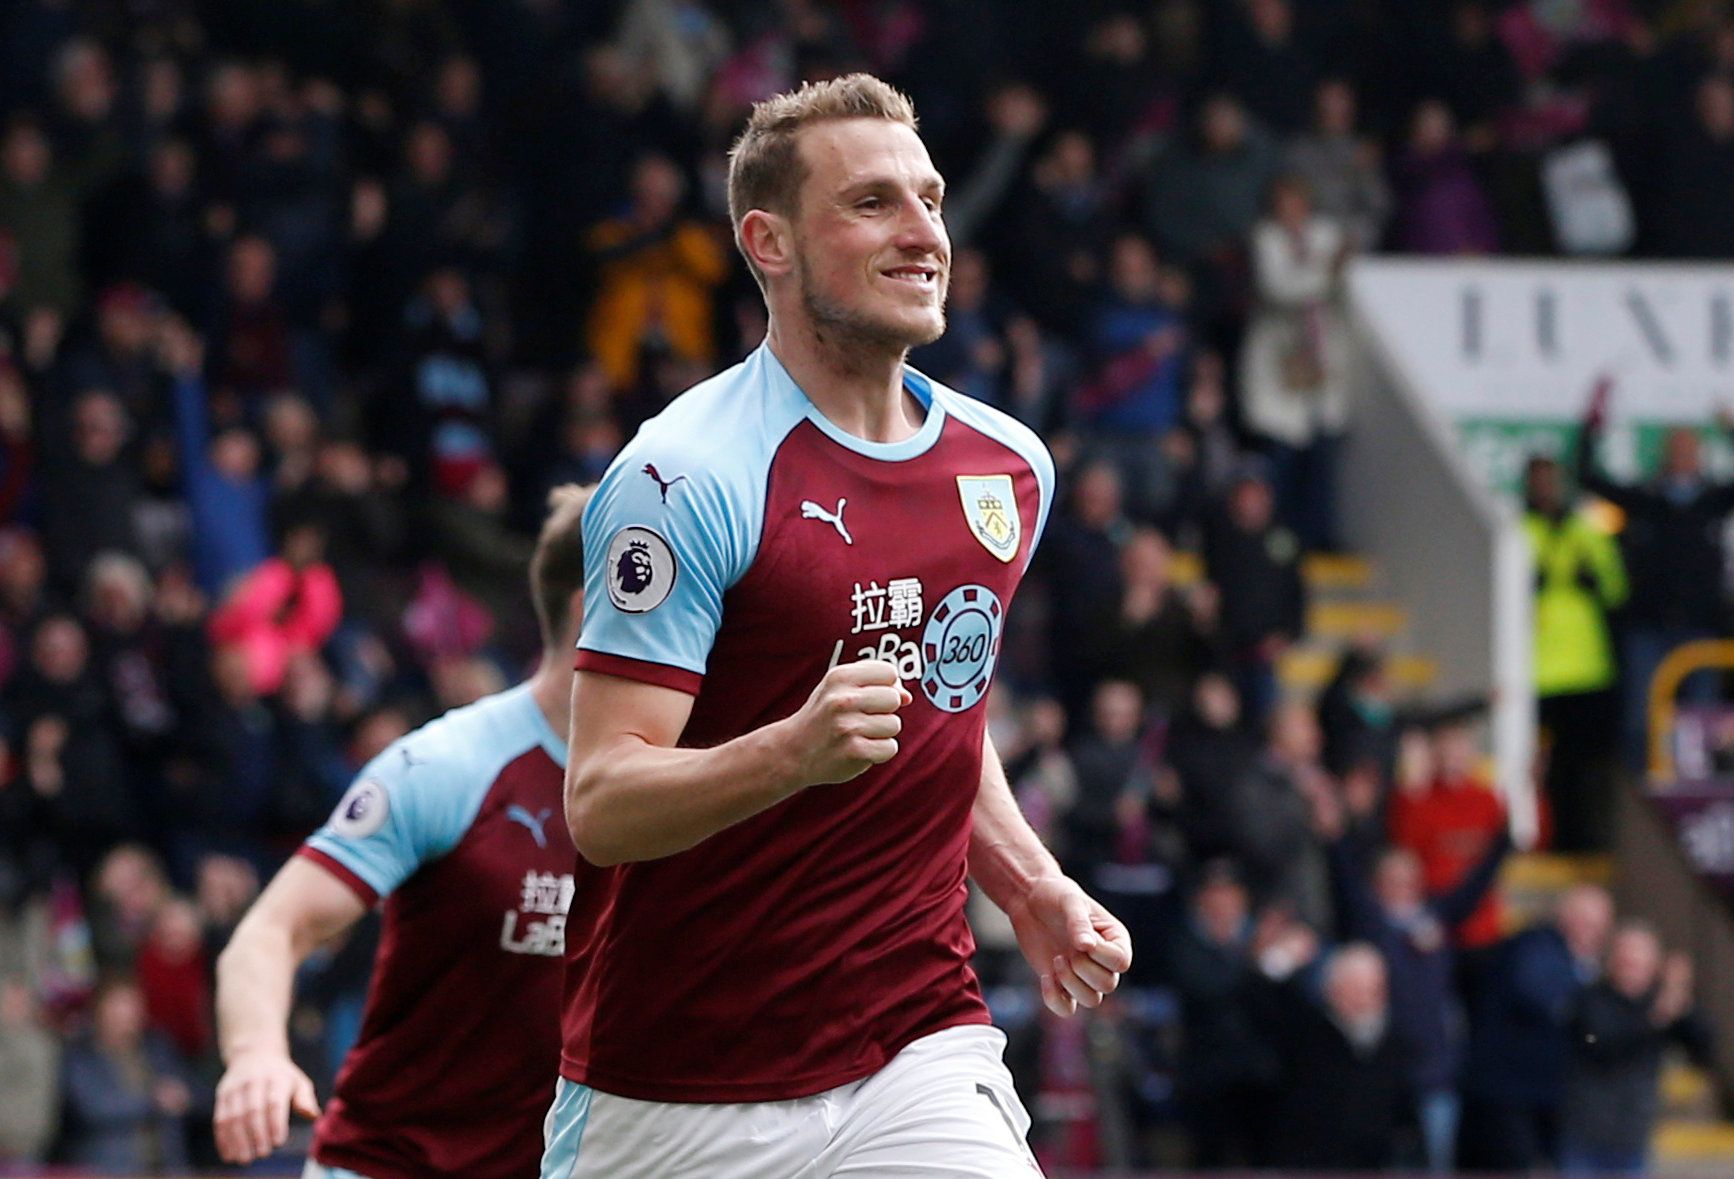 Soccer Football - Premier League - Burnley v Cardiff City - Turf Moor, Burnley, Britain - April 13, 2019  Burnley's Chris Wood celebrates scoring their second goal                  REUTERS/Andrew Yates  EDITORIAL USE ONLY. No use with unauthorized audio, video, data, fixture lists, club/league logos or "live" services. Online in-match use limited to 75 images, no video emulation. No use in betting, games or single club/league/player publications.  Please contact your account representative for f